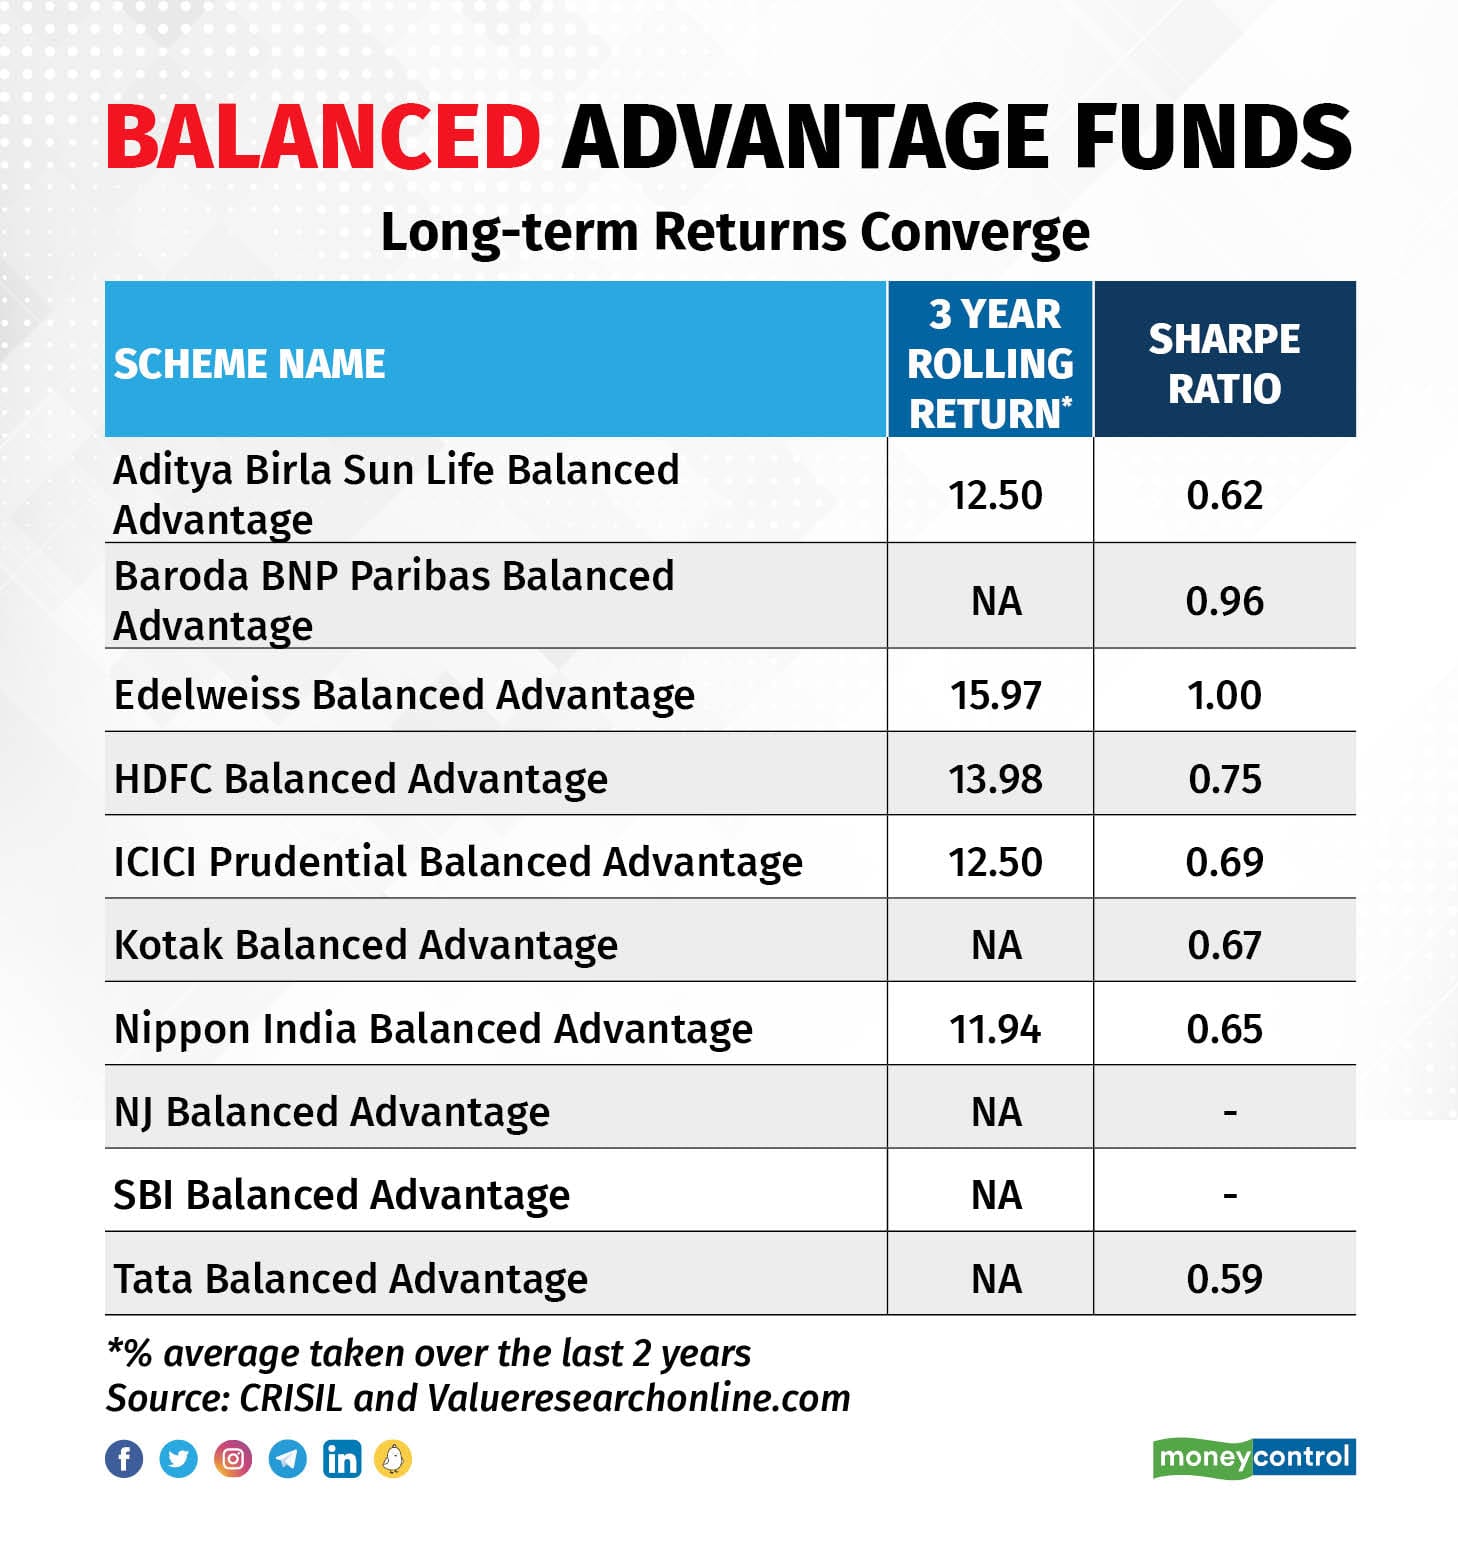 Although Balanced Advantage Funds follow different strategies to make the most of equity markets, their long-term returns usually converge